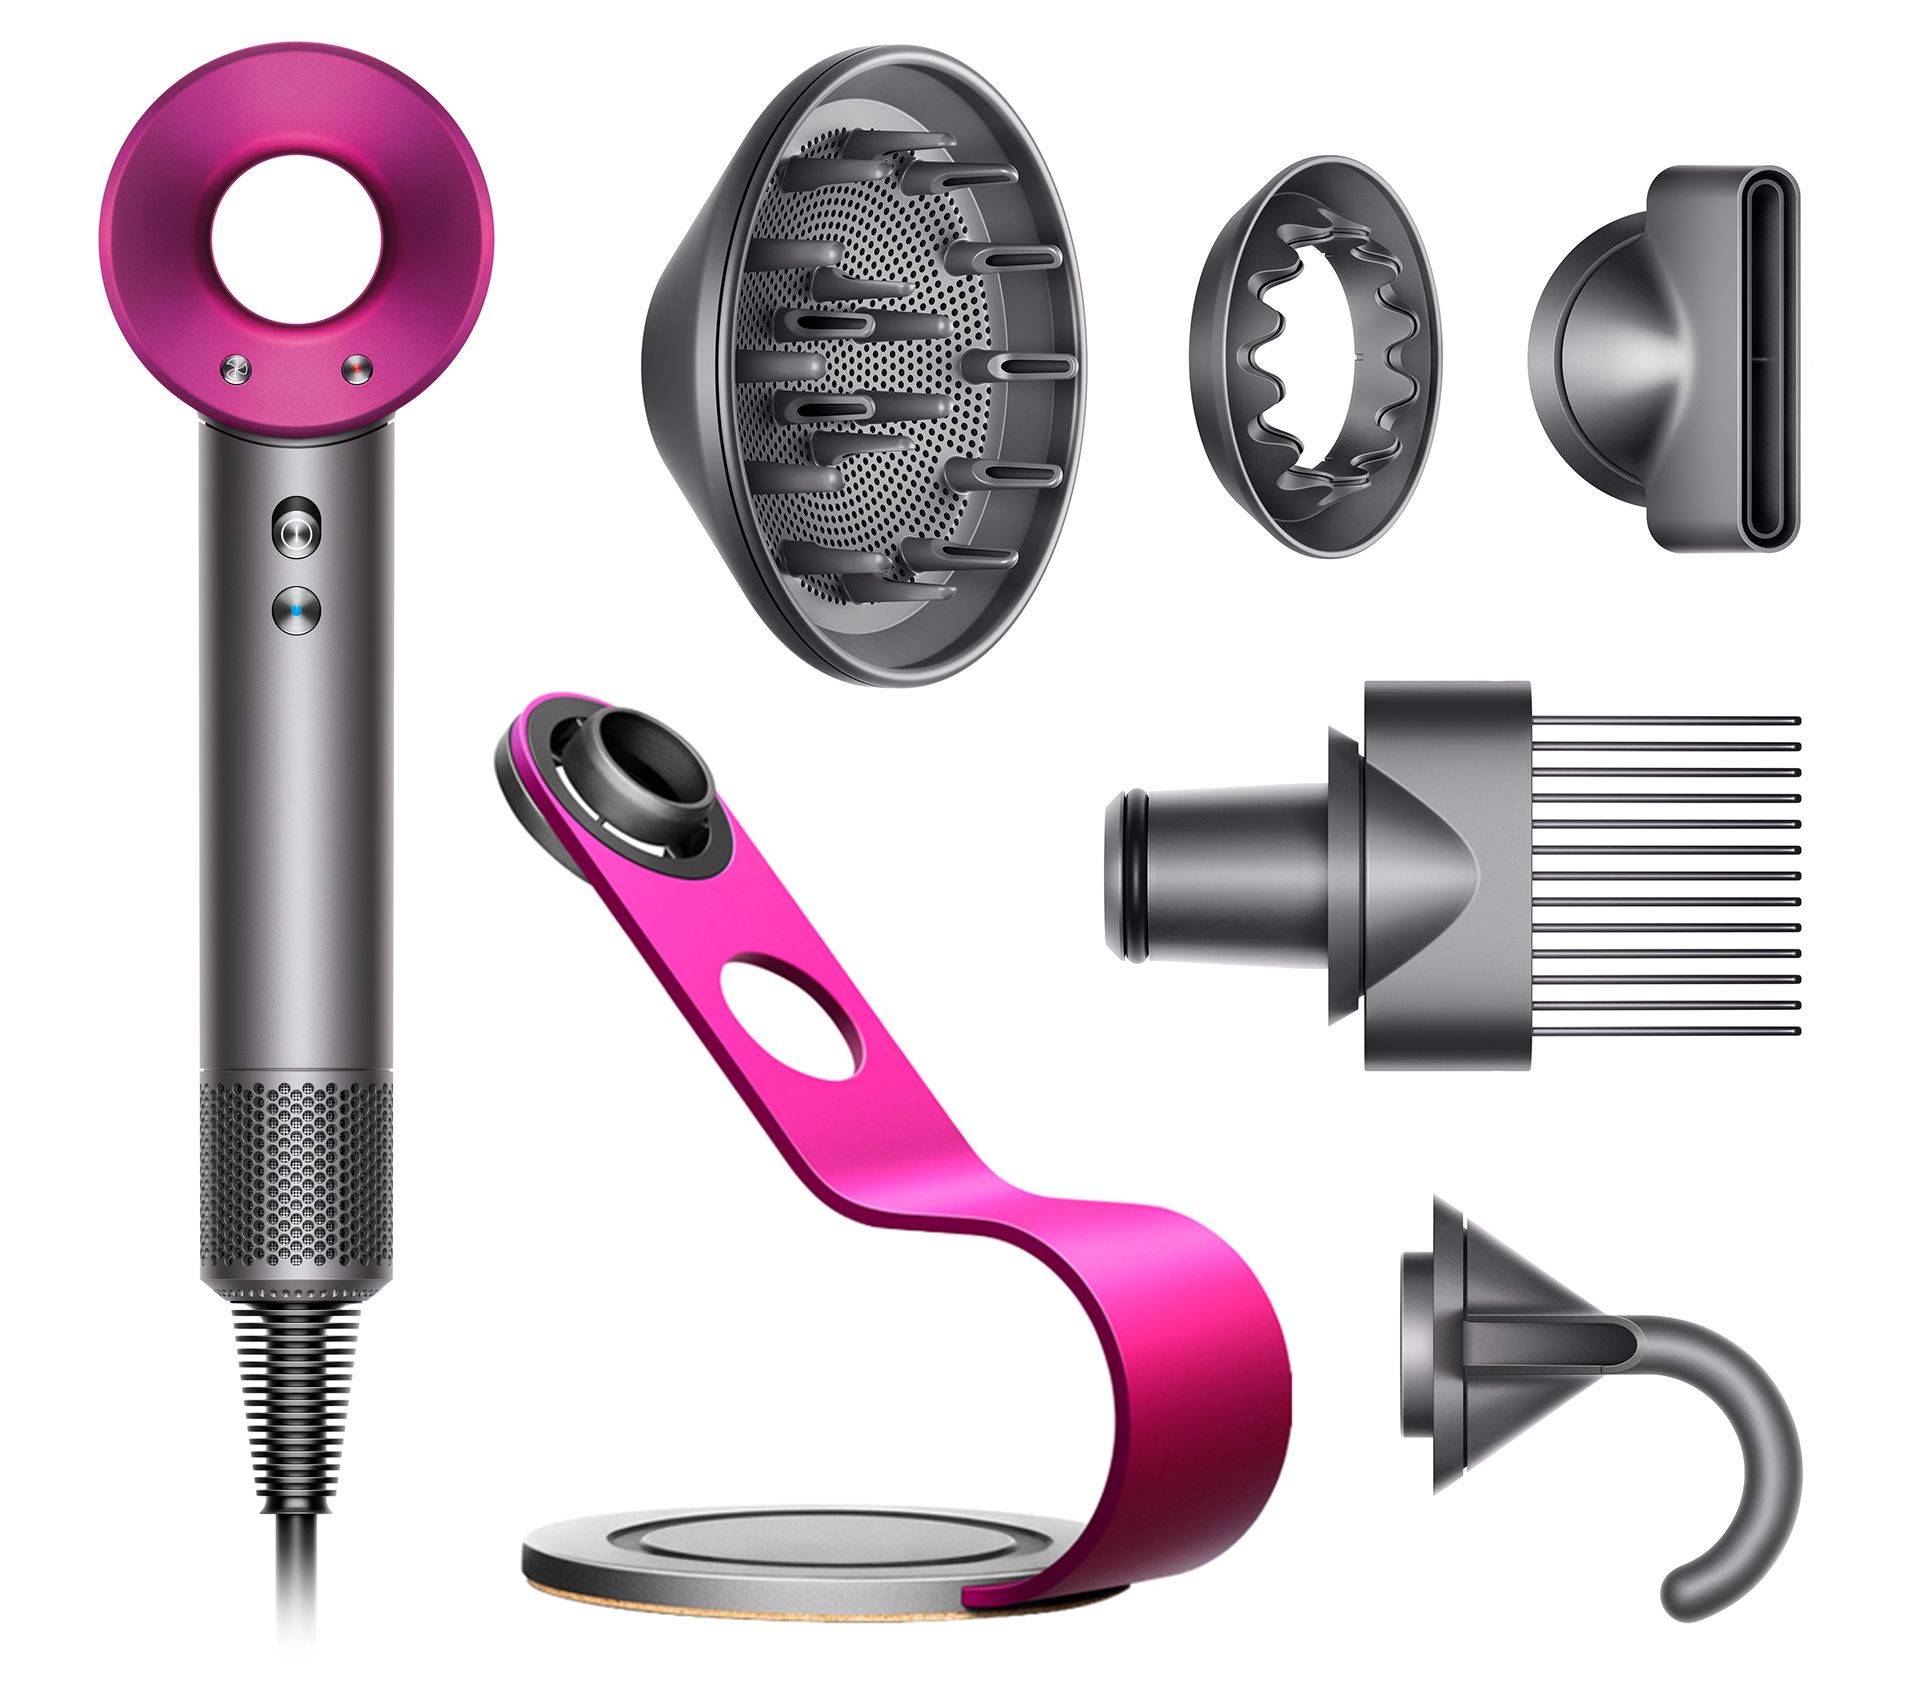 Dyson Supersonic Hairdryer with Attachments and Display Stand - QVC.com